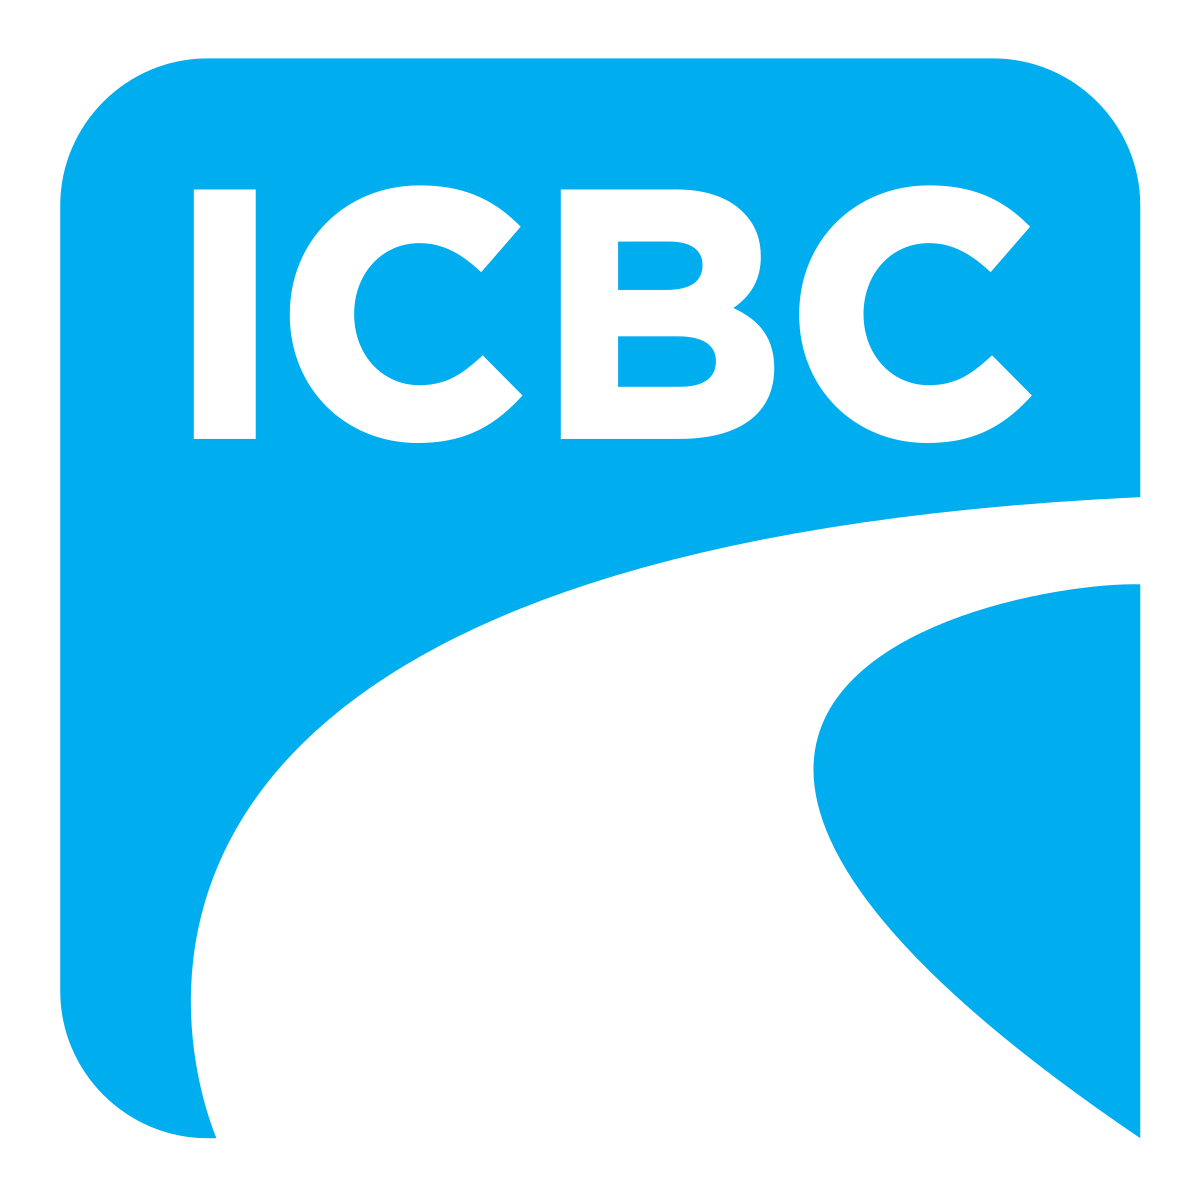 Logo of the Insurance Corporation of British Columbia, a sponsor of the West Coast Brain injury Conference